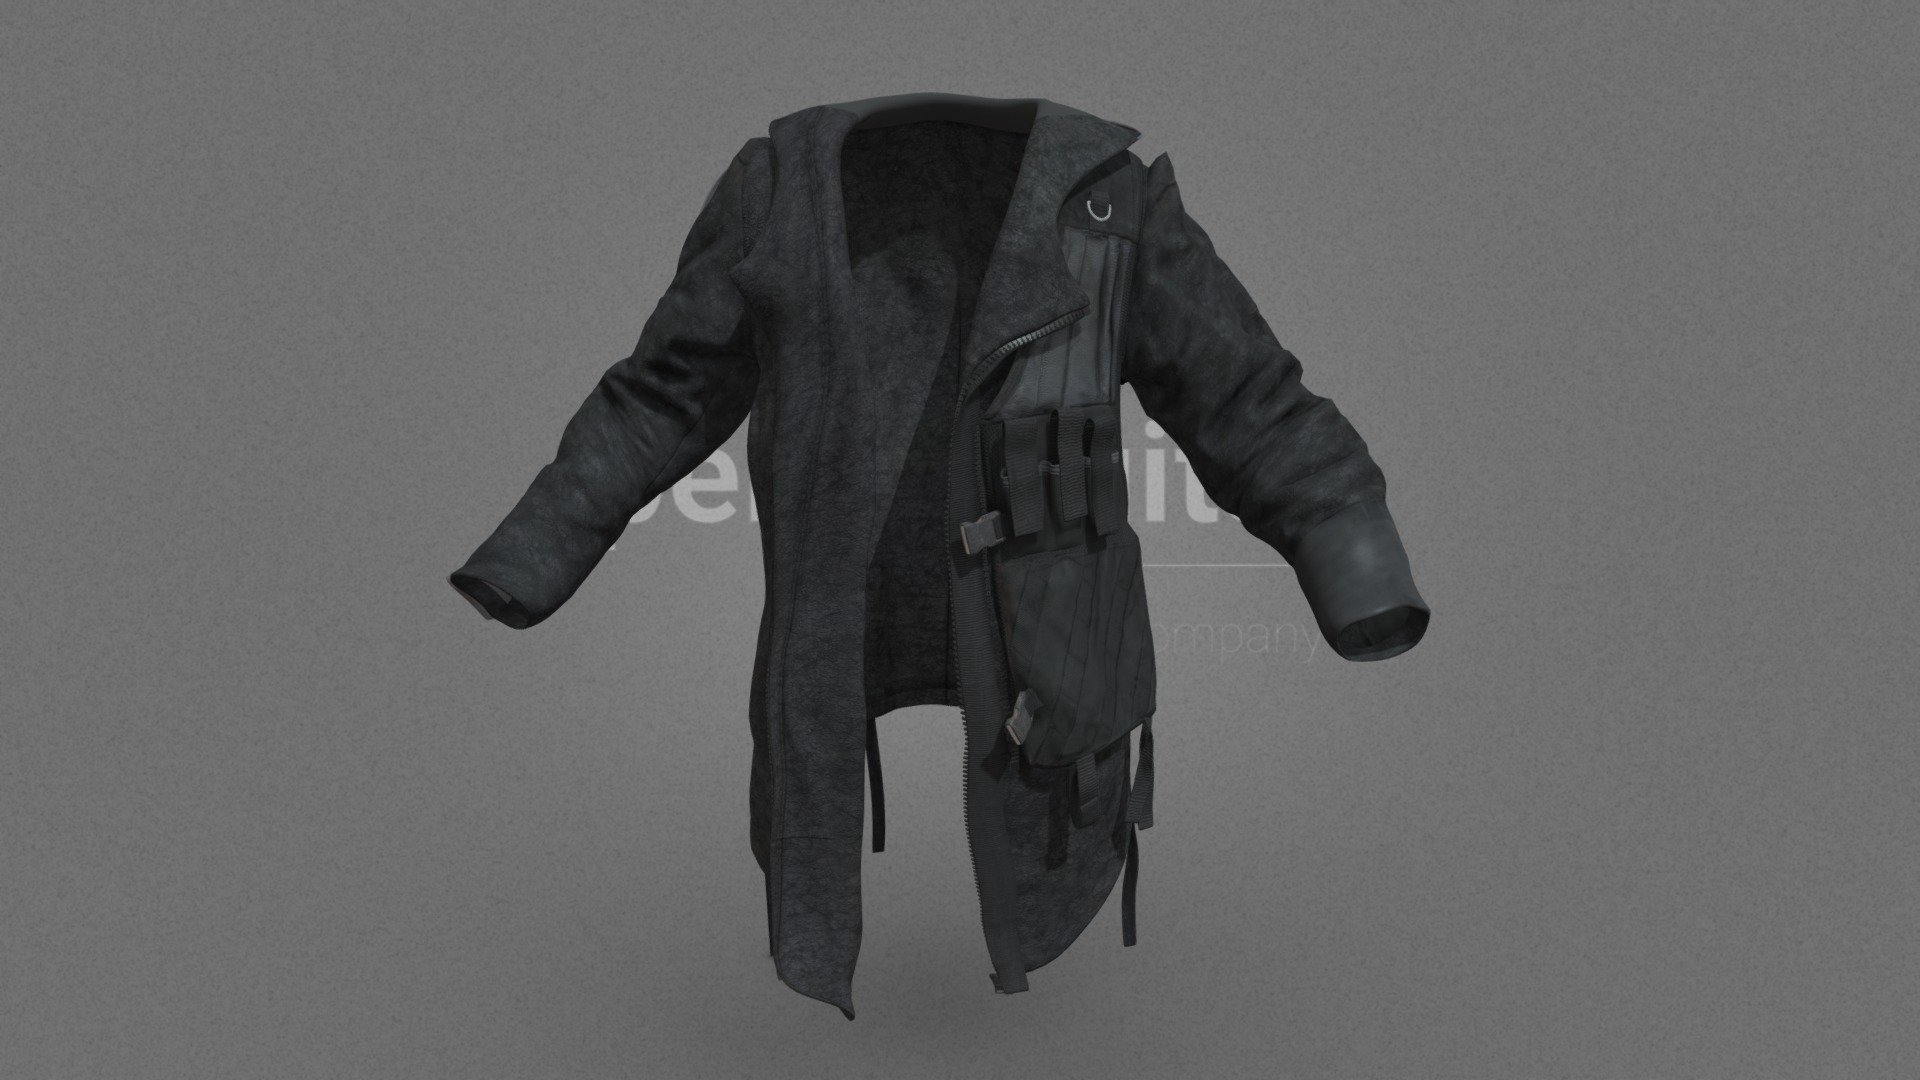 Our Wasteland Garments collection consists of several garments, which you can use in your audiovisual creations, extracted and modeled from our catalog of photogrammetry pieces.

They are optimized for use in 3D scenes of high polygonalization and optimized for rendering. We do not include characters, but they are positioned for you to include and adjust your own character. They have a model LOW (_LODRIG) inside the Blender file (included in the AdditionalFiles), which you can use for vertex weighting or cloth simulation and thus, make the transfer of vertices or property masks from the LOW to the HIGH** model.

We have included the texture maps in high resolution, as well as the Displacement maps, so you can make extreme point of view with your 3D cameras, as well as the Blender file so you can edit any aspect of the set.

Enjoy it.

Web: https://peris.digital/ - Wasteland Garments Series - Model 06 Jacket - 3D model by Peris Digital (@perisdigital) 3d model